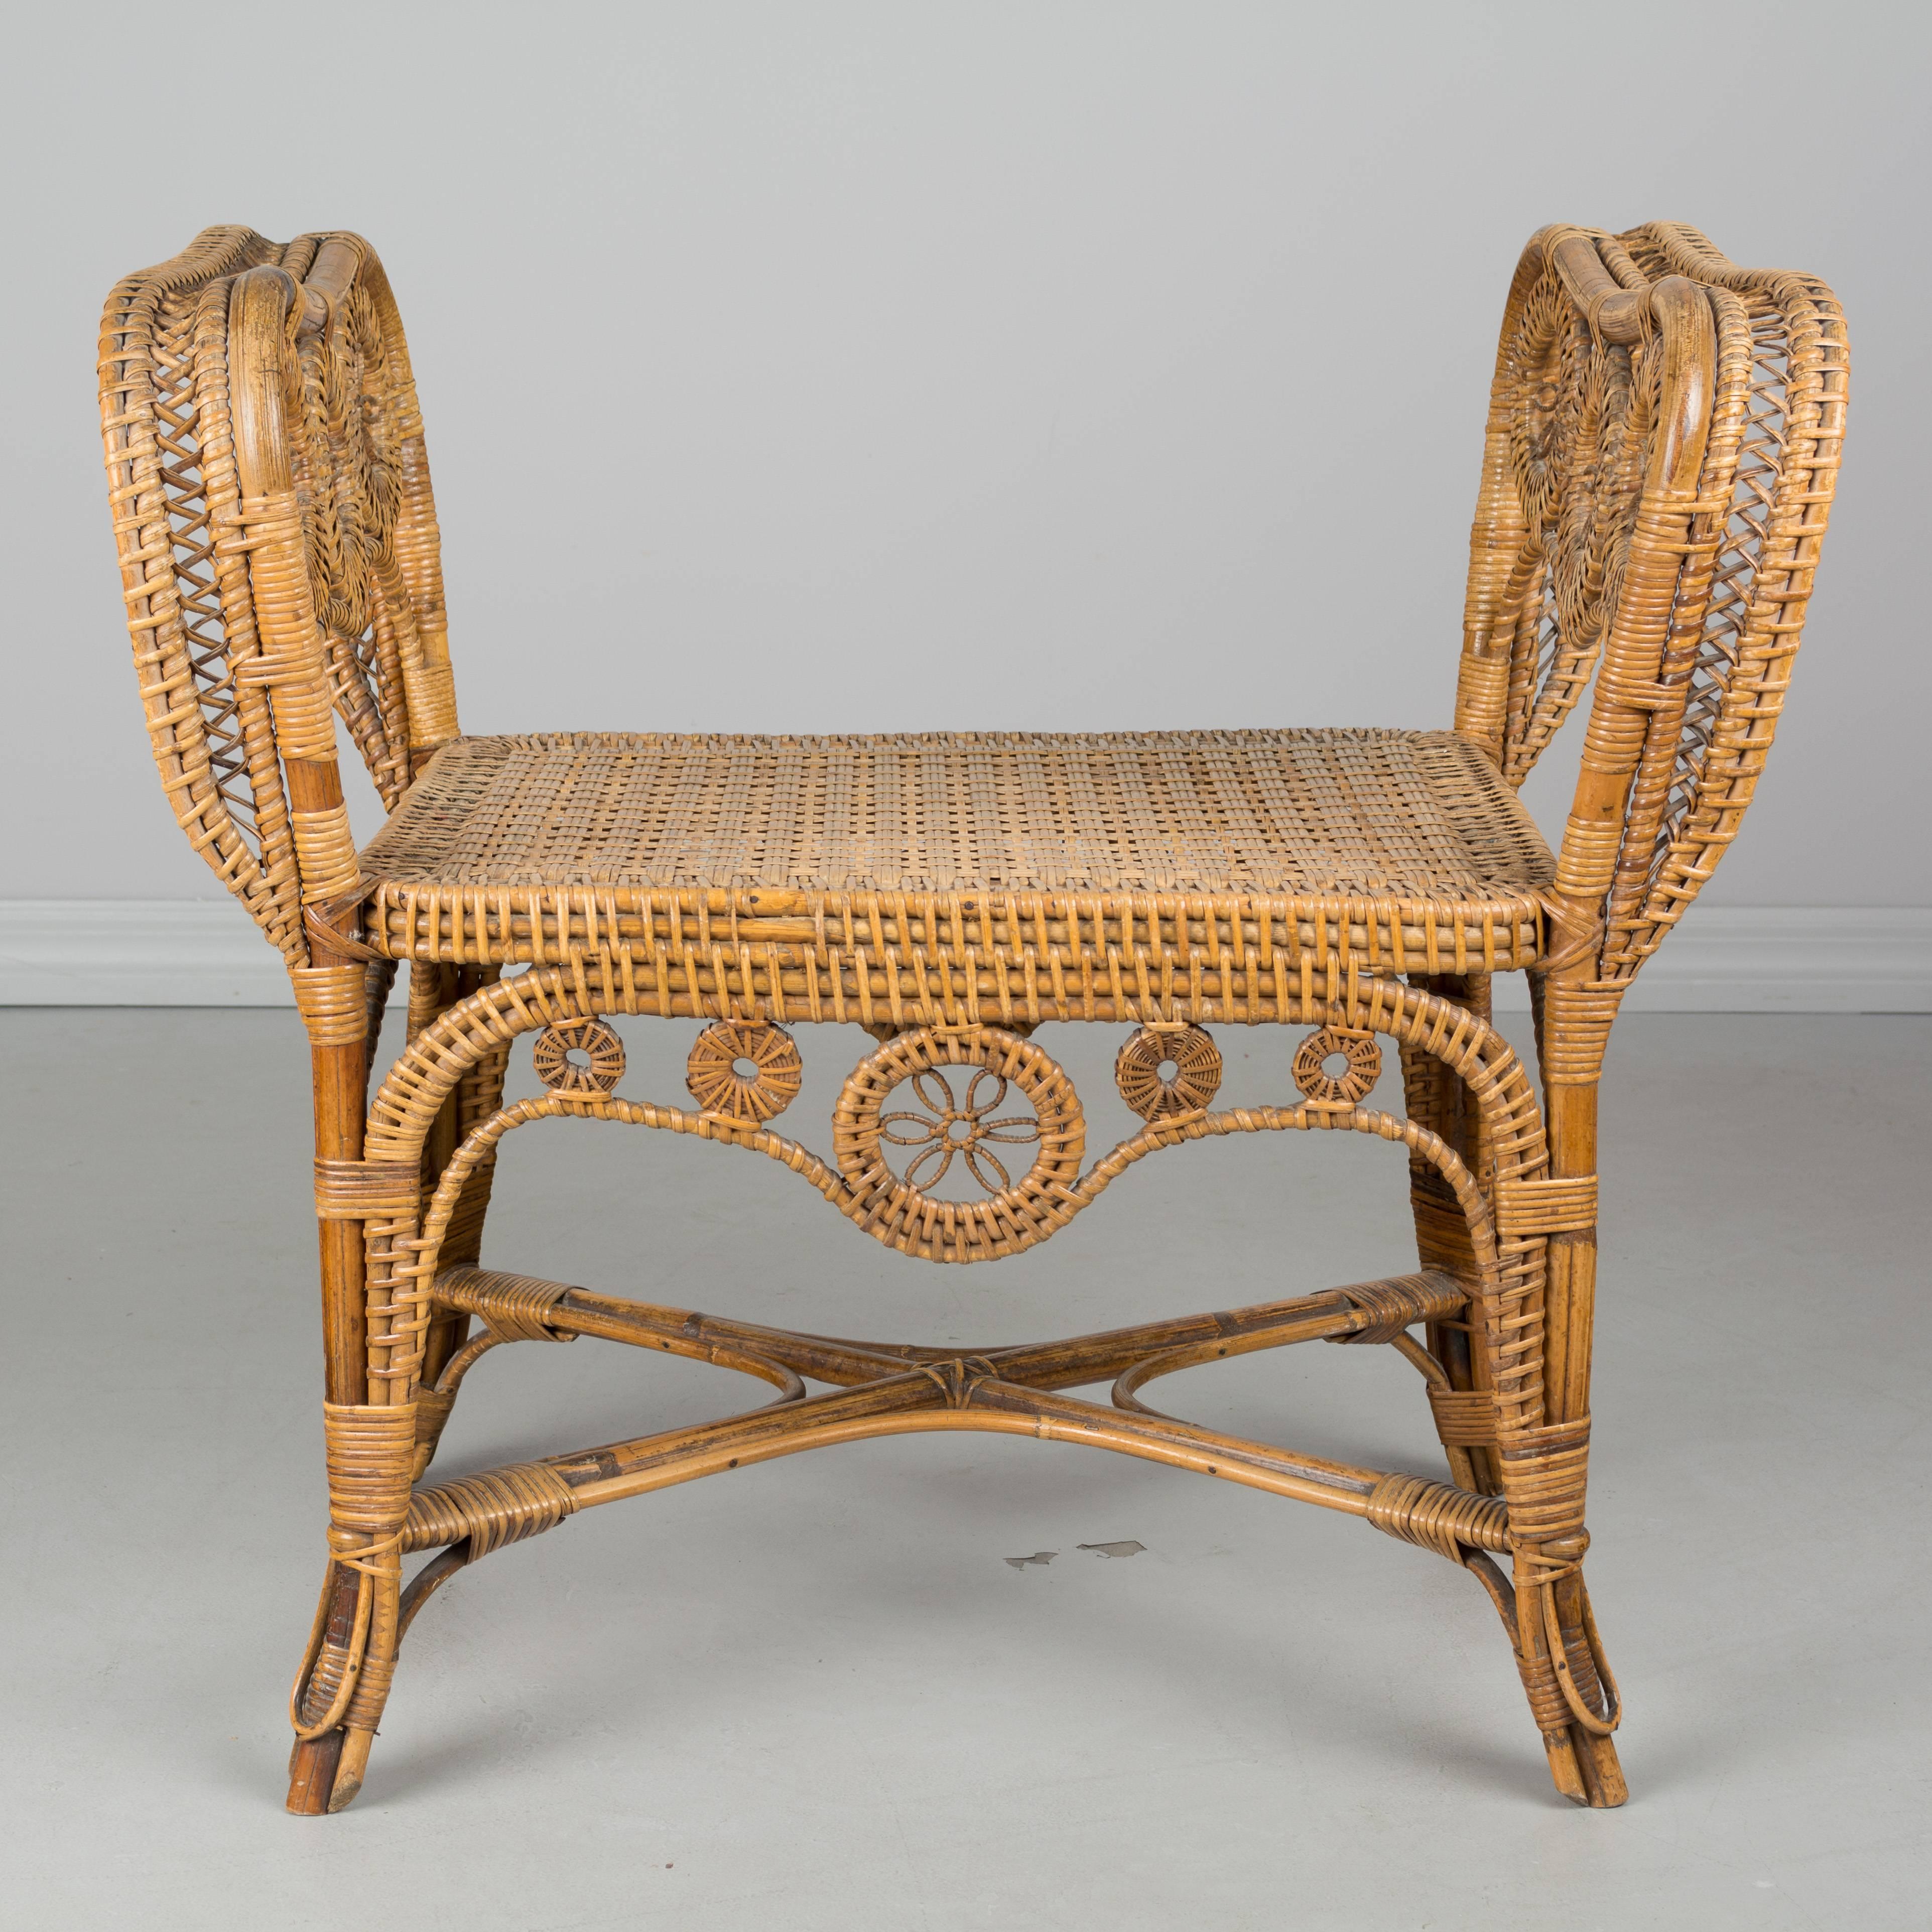 French Provincial 19th Century, French Wicker Bench by Perret & Vibert